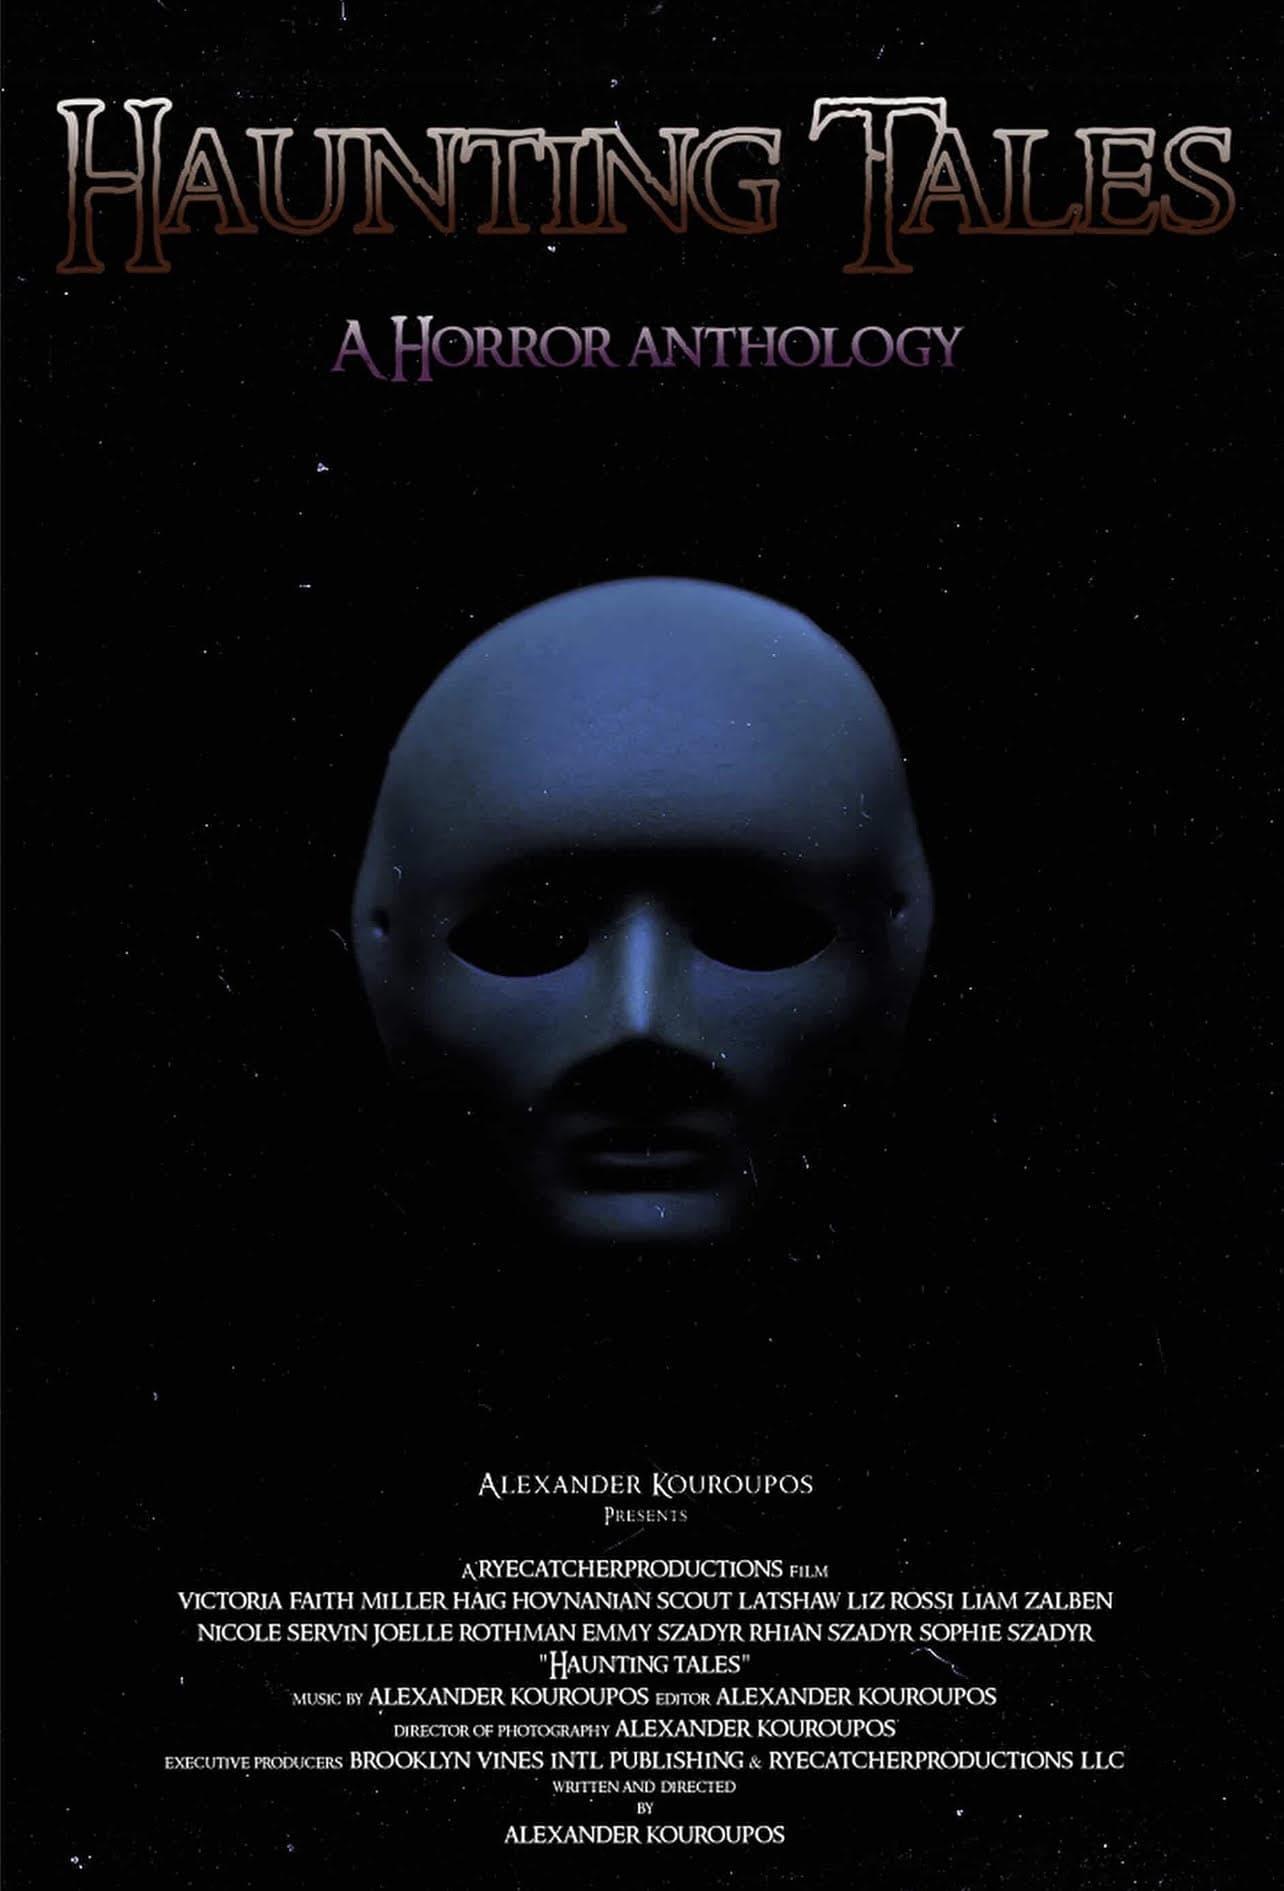 Haunting Tales: A Horror Anthology poster